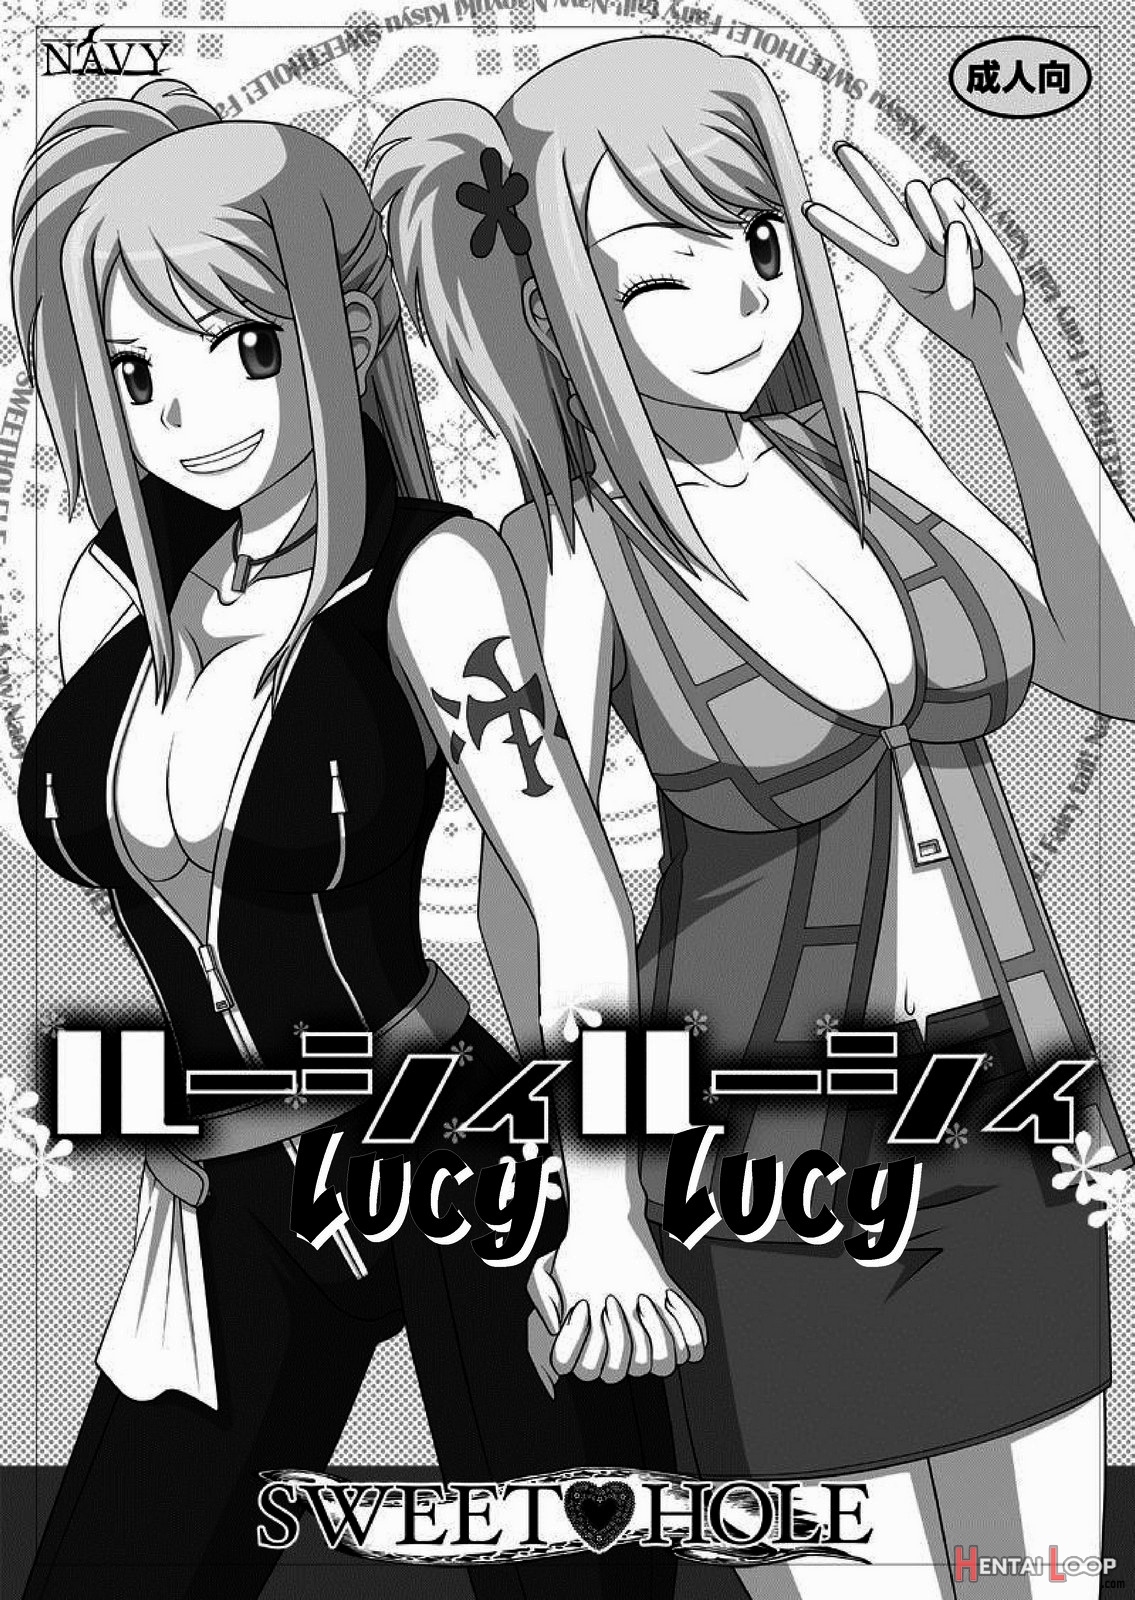 Okuchi No Ehon Vol. 36 Sweethole -lucy Lucy- page 2